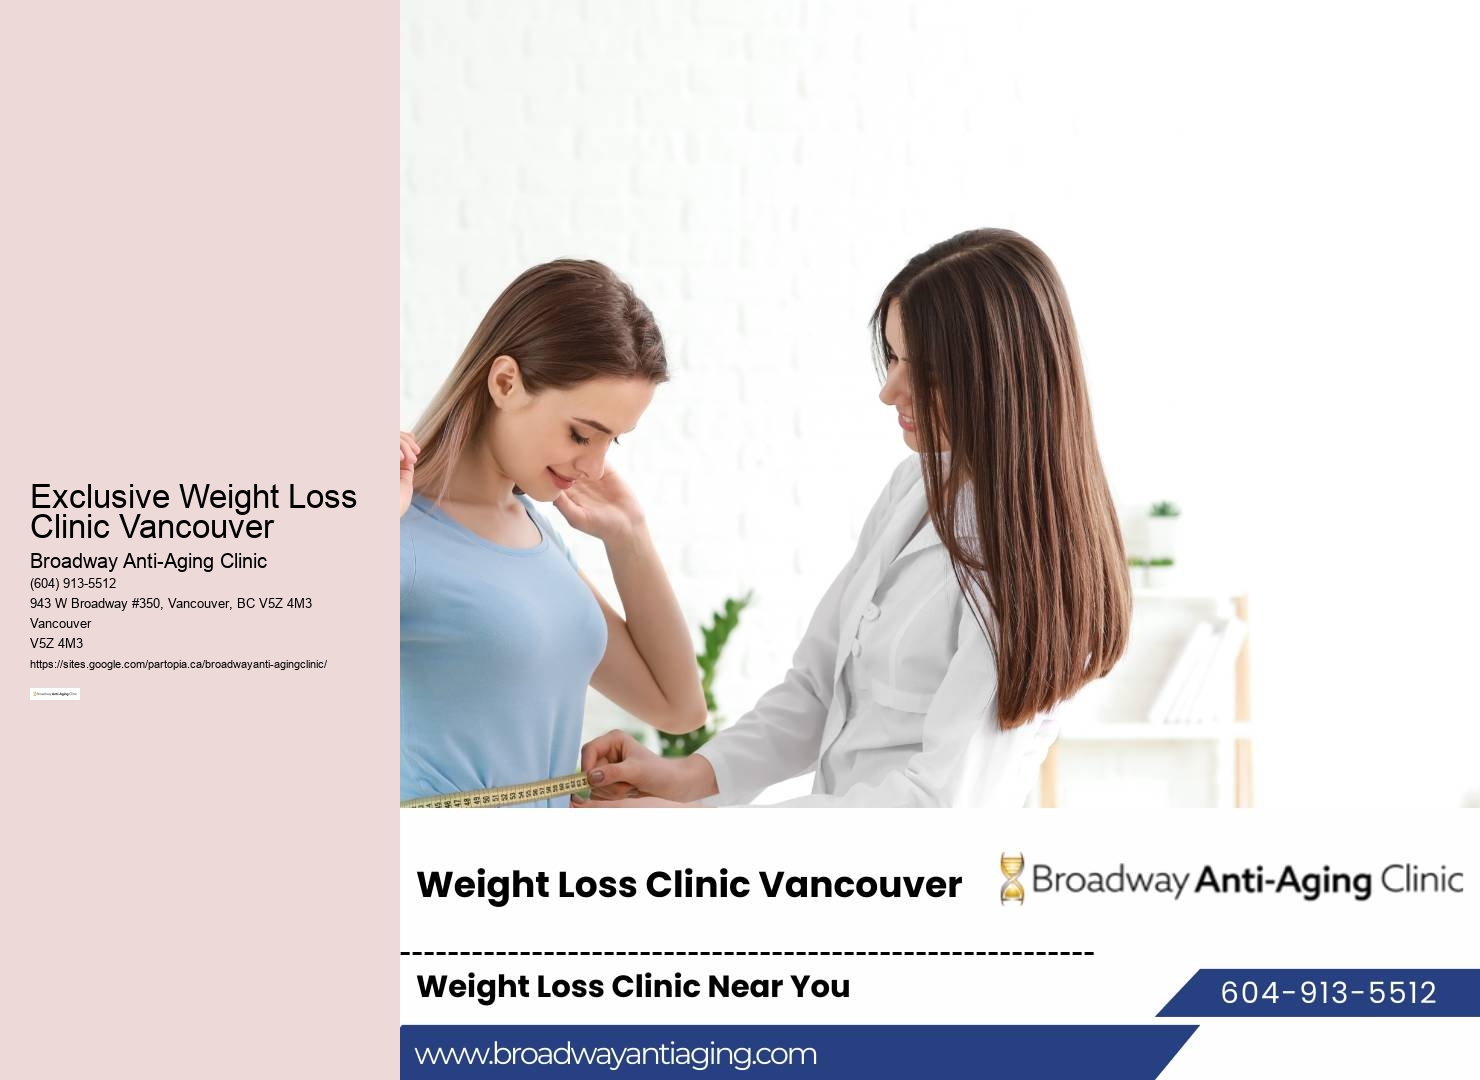 Exclusive Weight Loss Clinic Vancouver